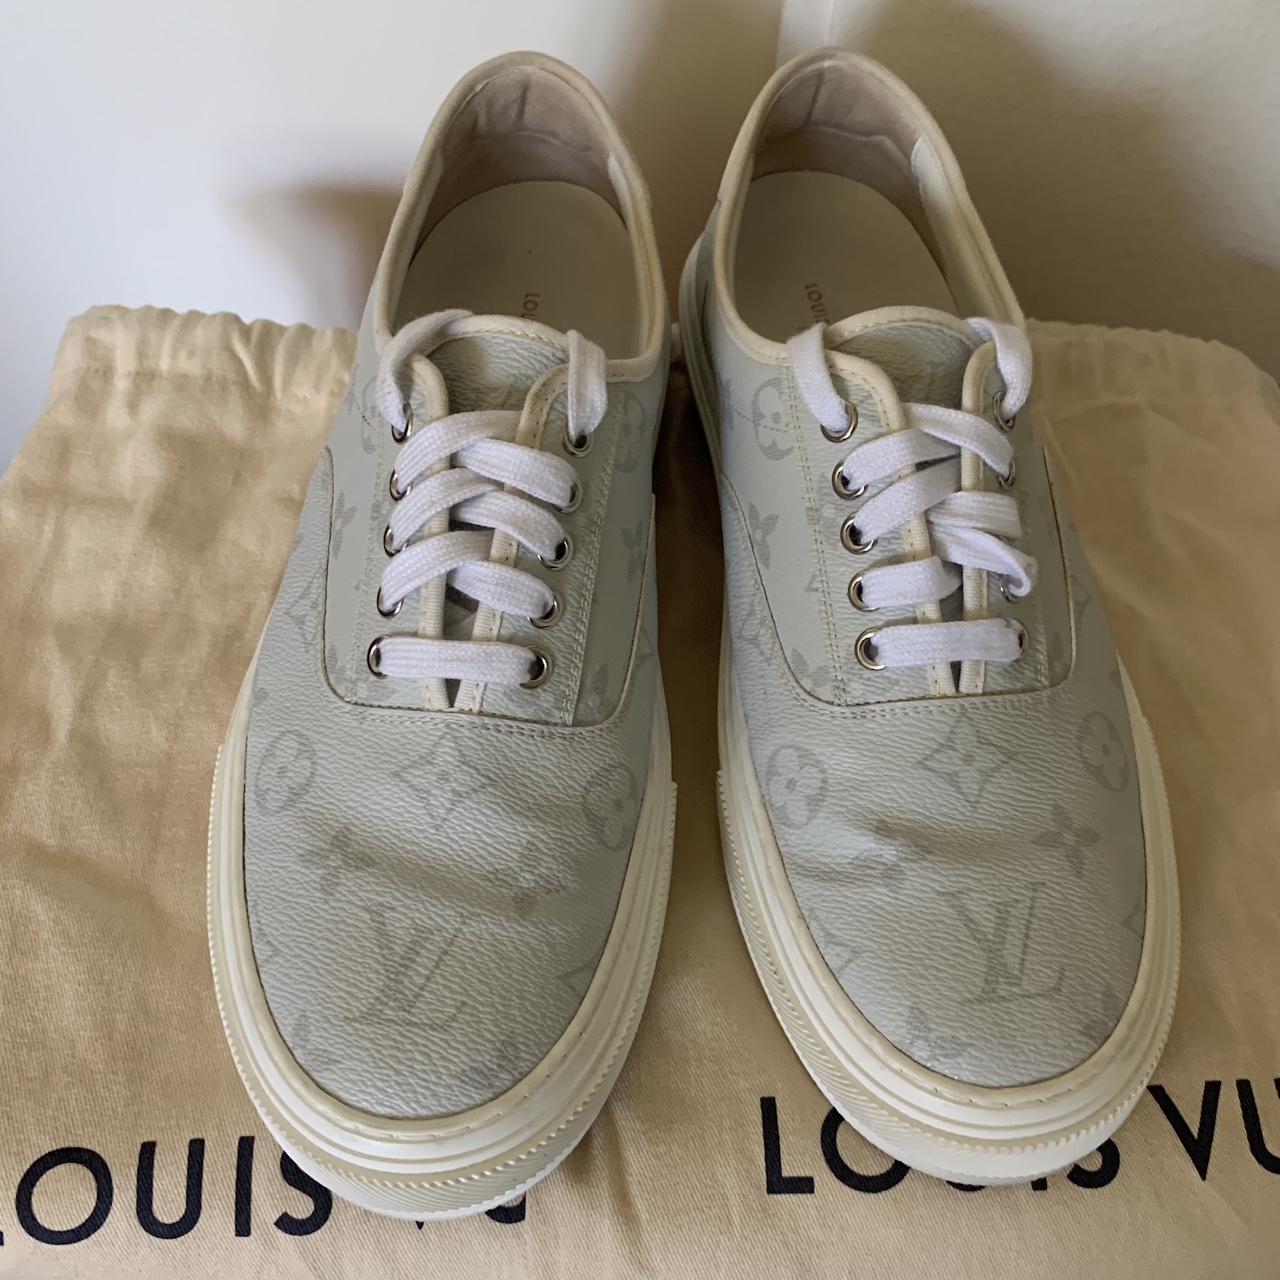 Trocadero leather low trainers